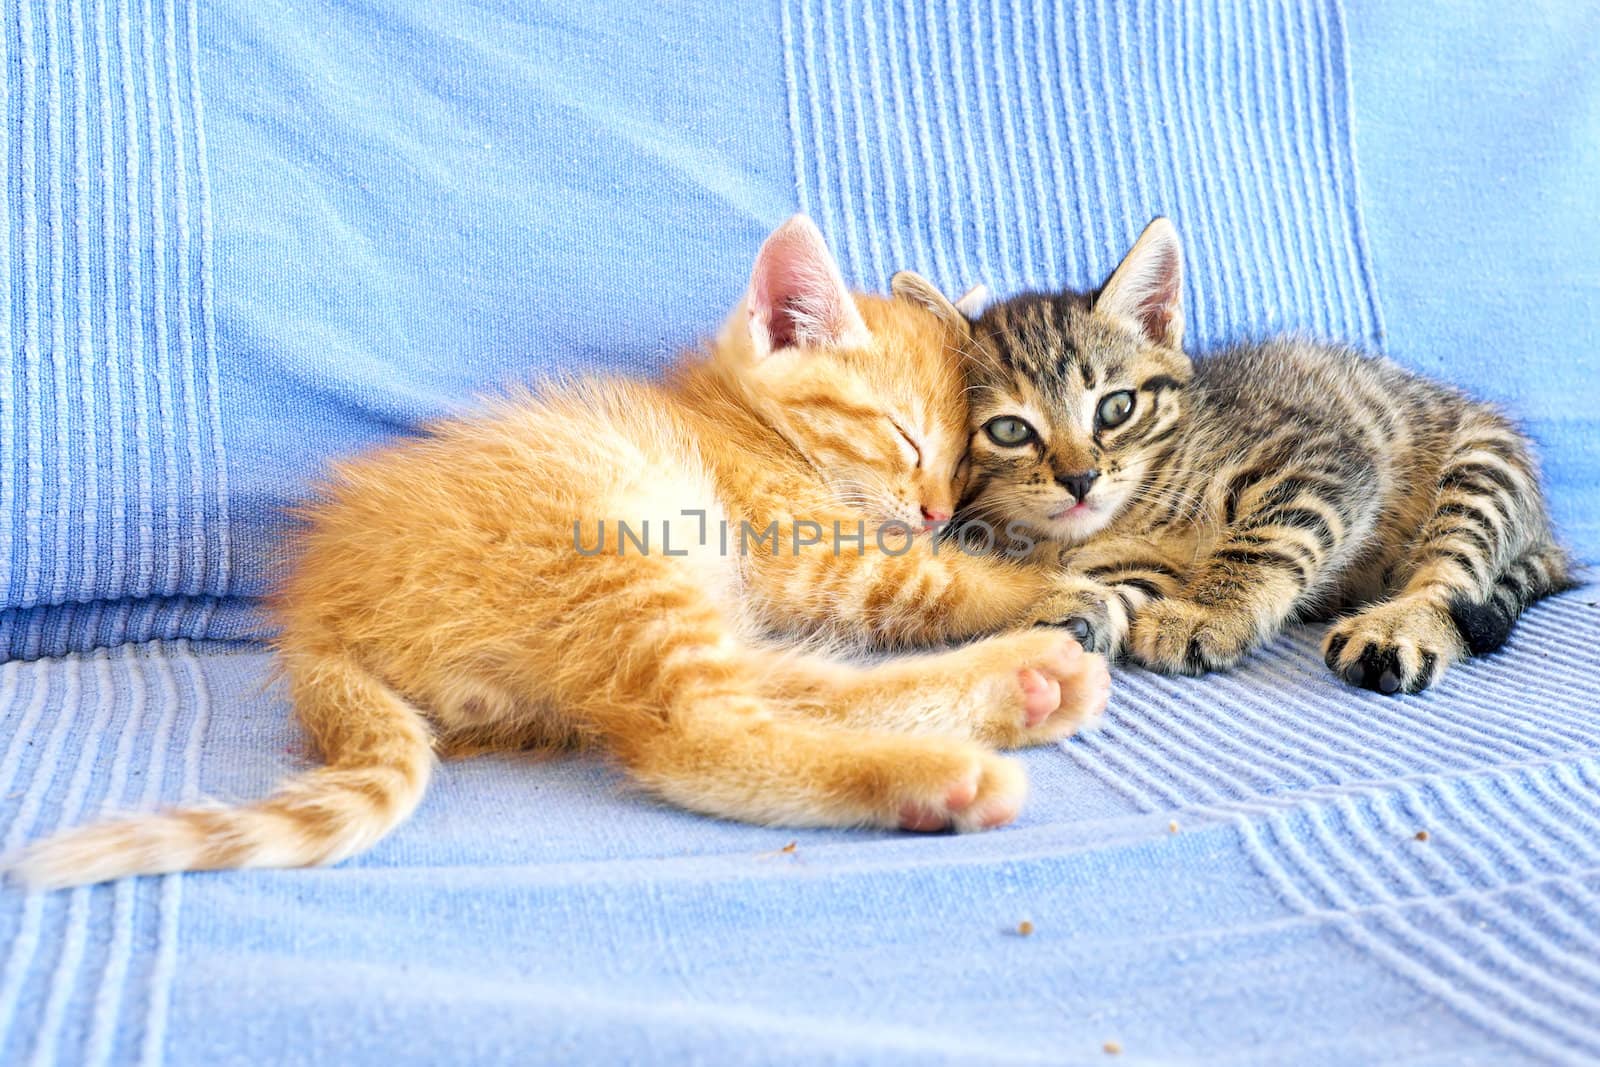 Little kittens on a couch by devy